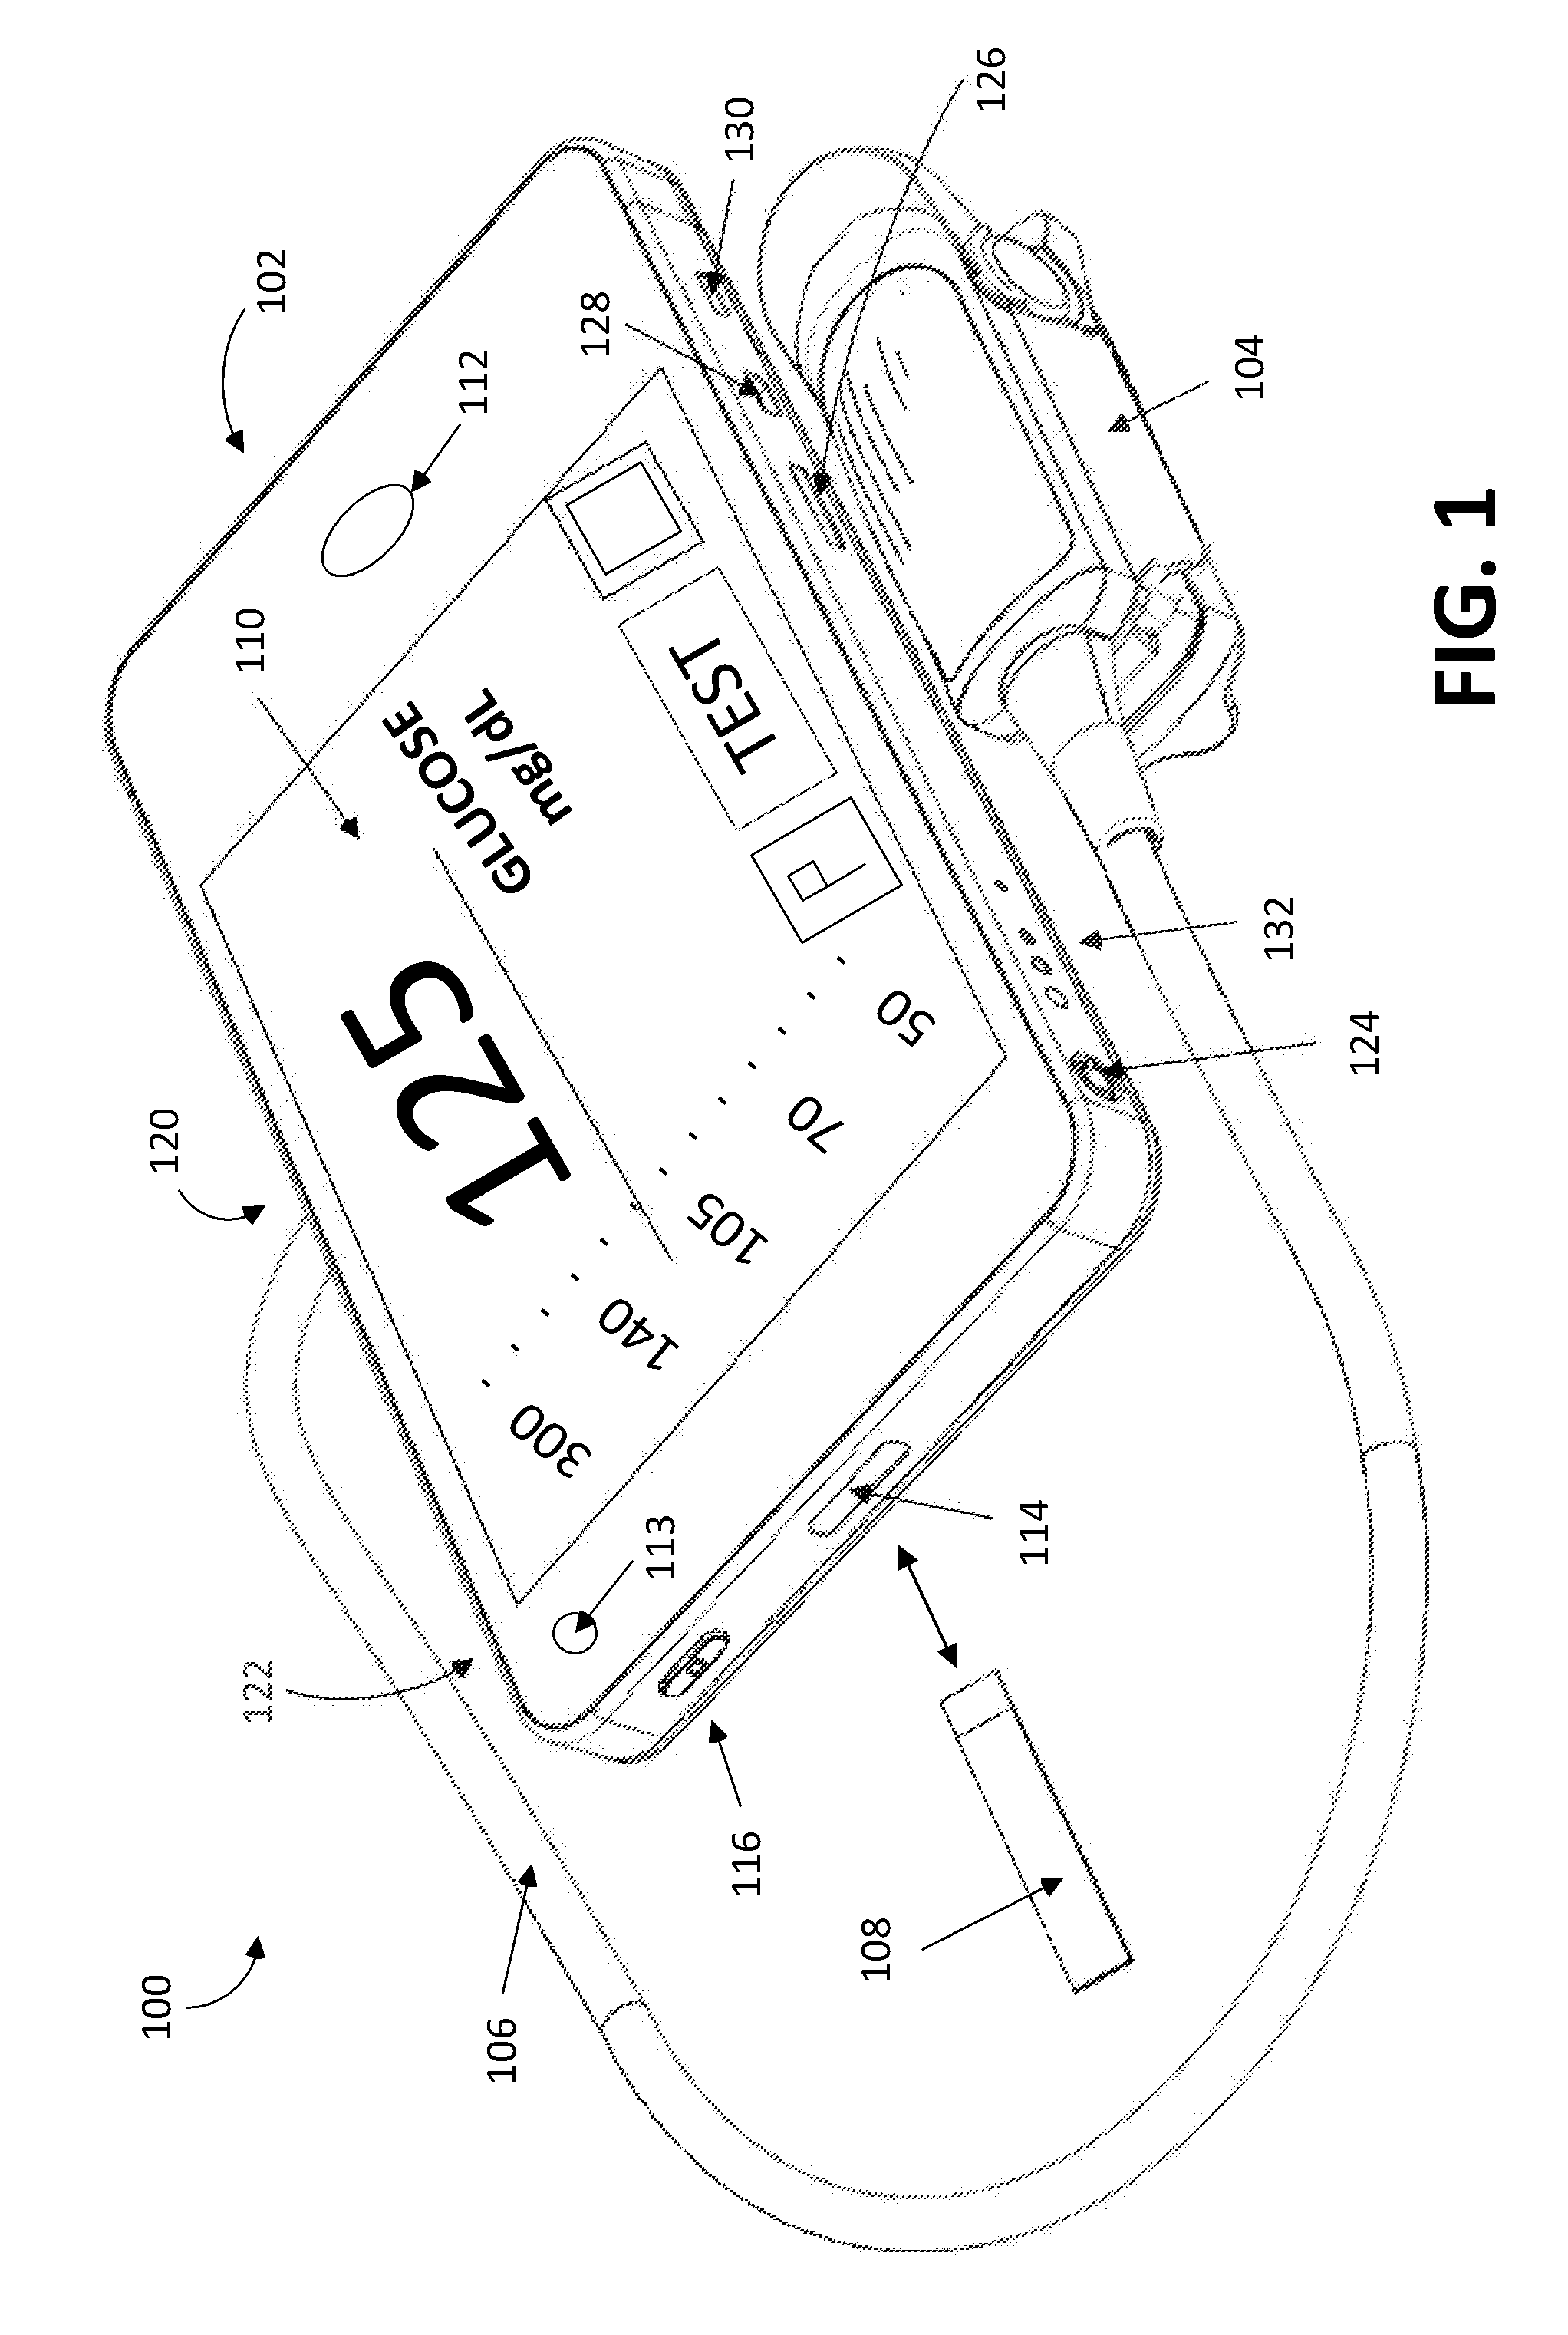 Handheld processing device including medical applications for minimally and non invasive glucose measurements